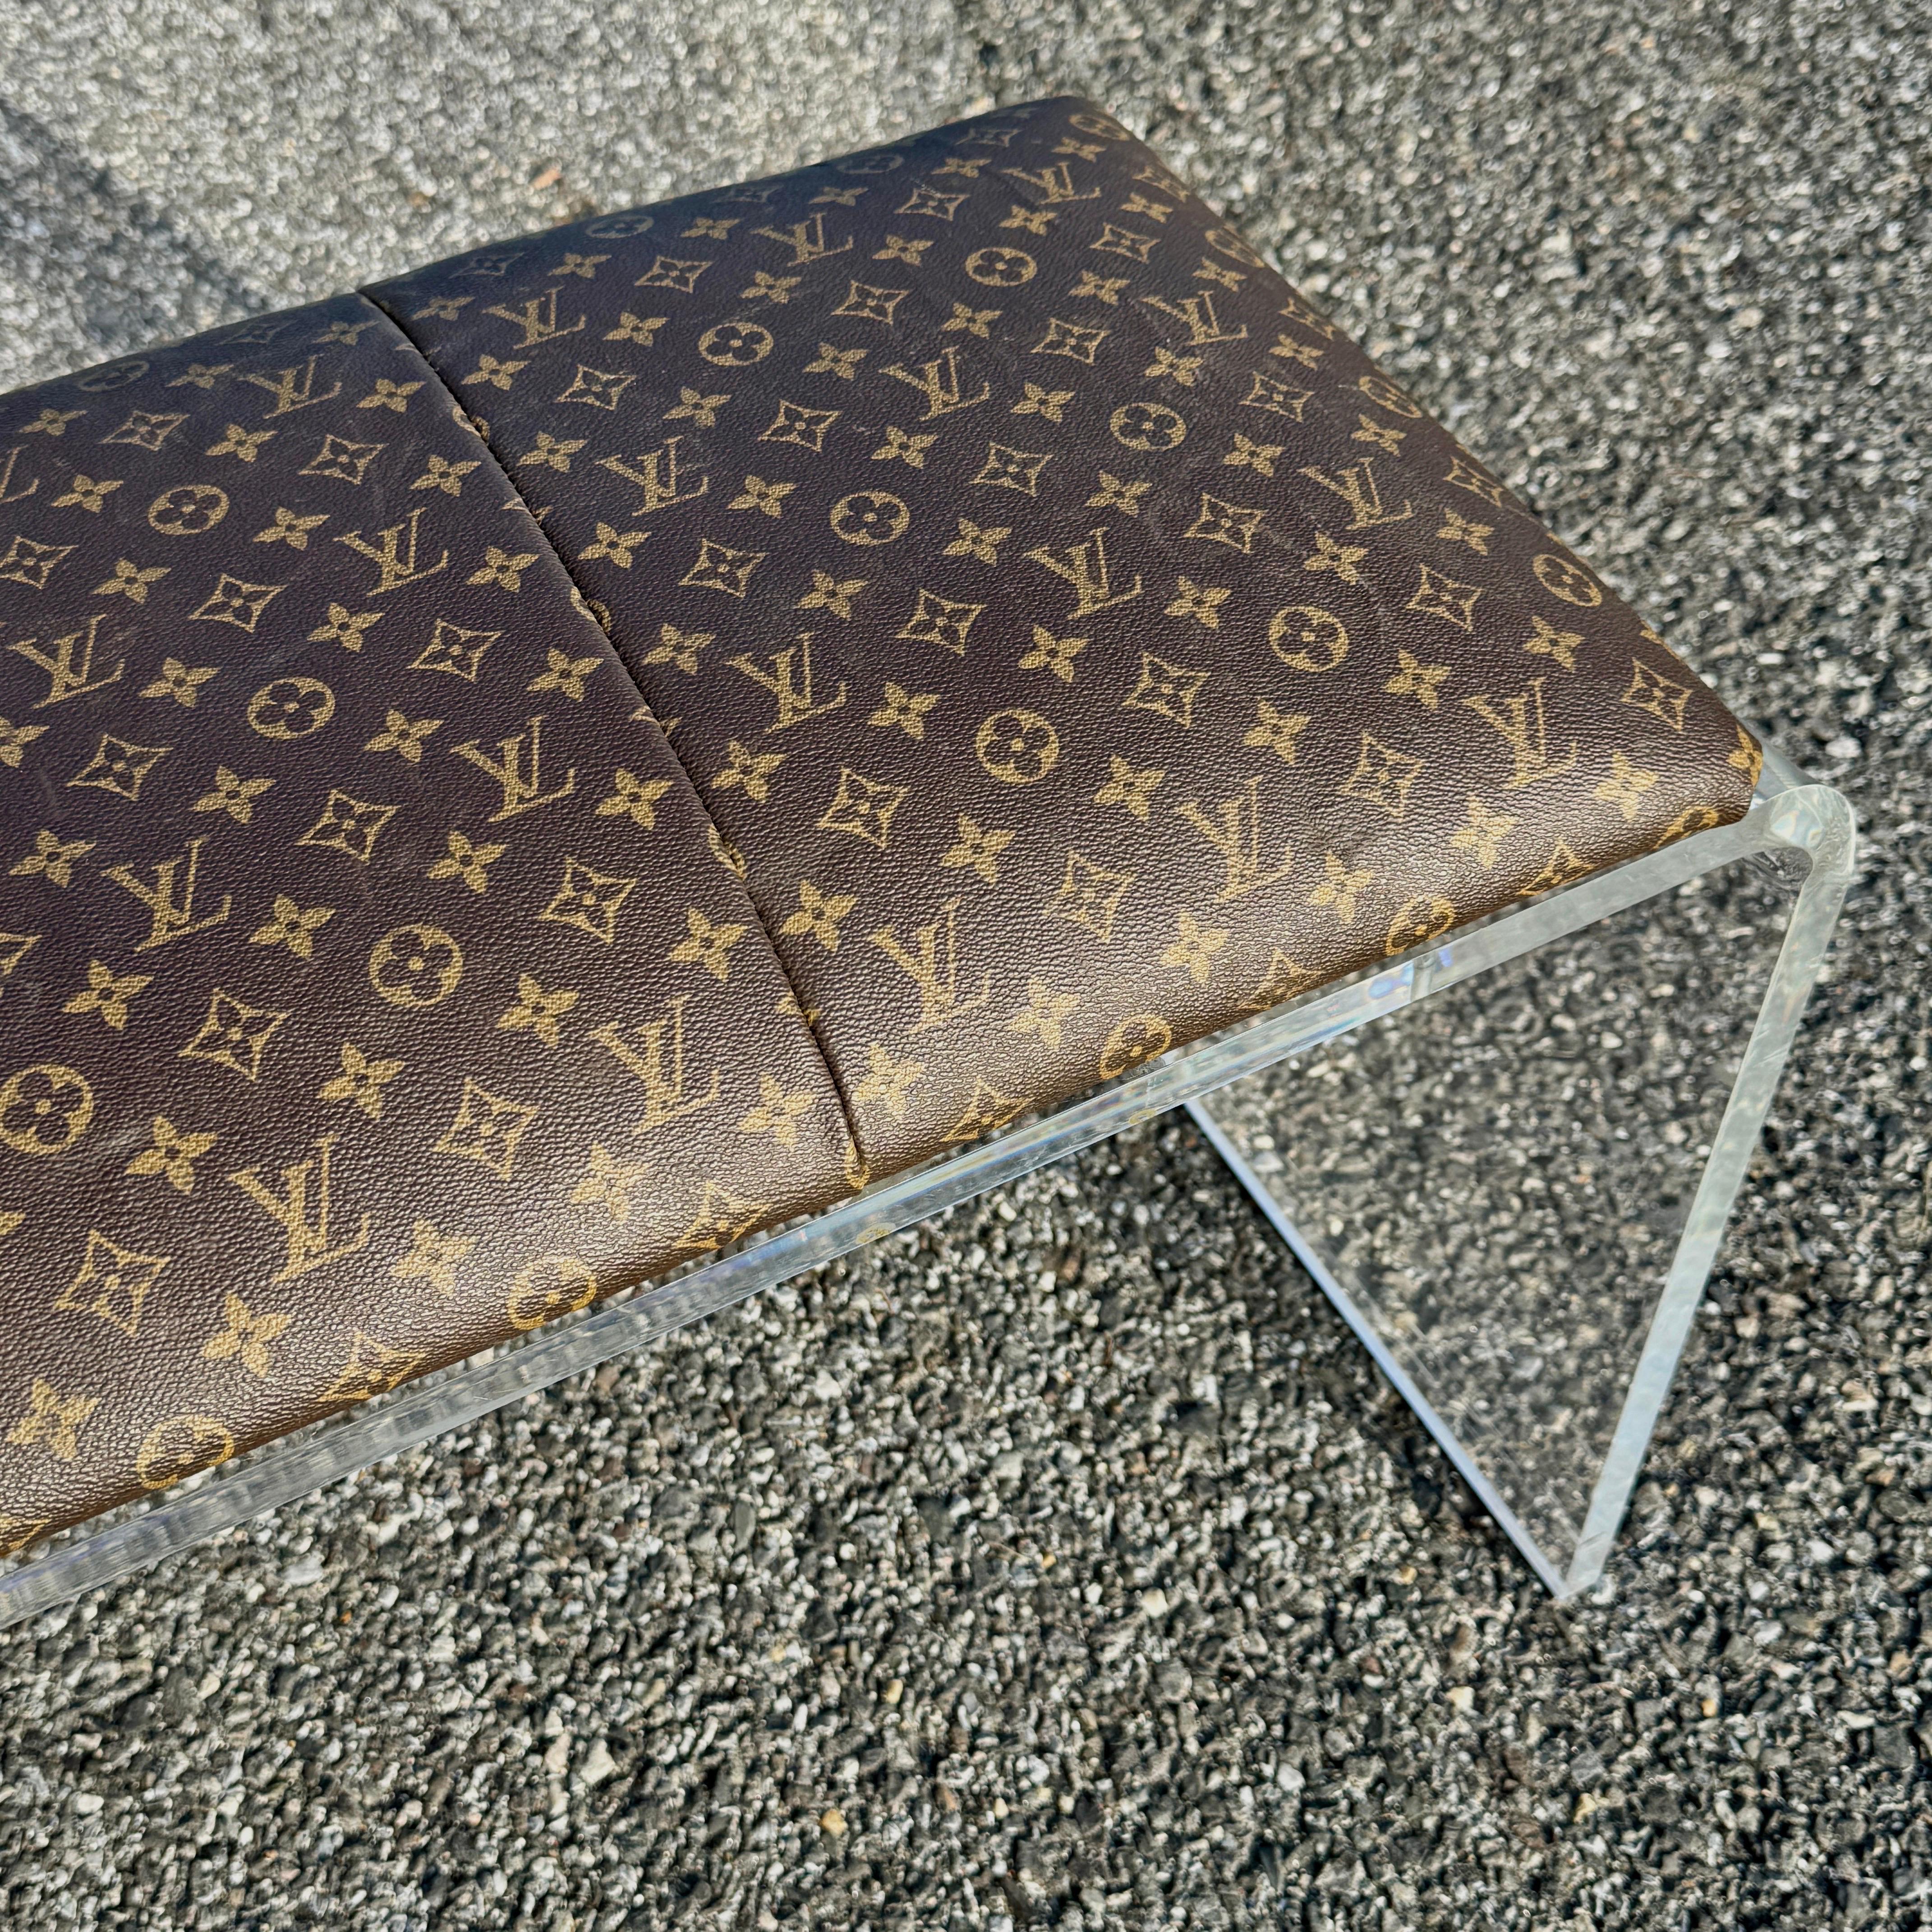 Lucite Bench Upholstered in Louis Vuitton Monogram Fabric  For Sale 4